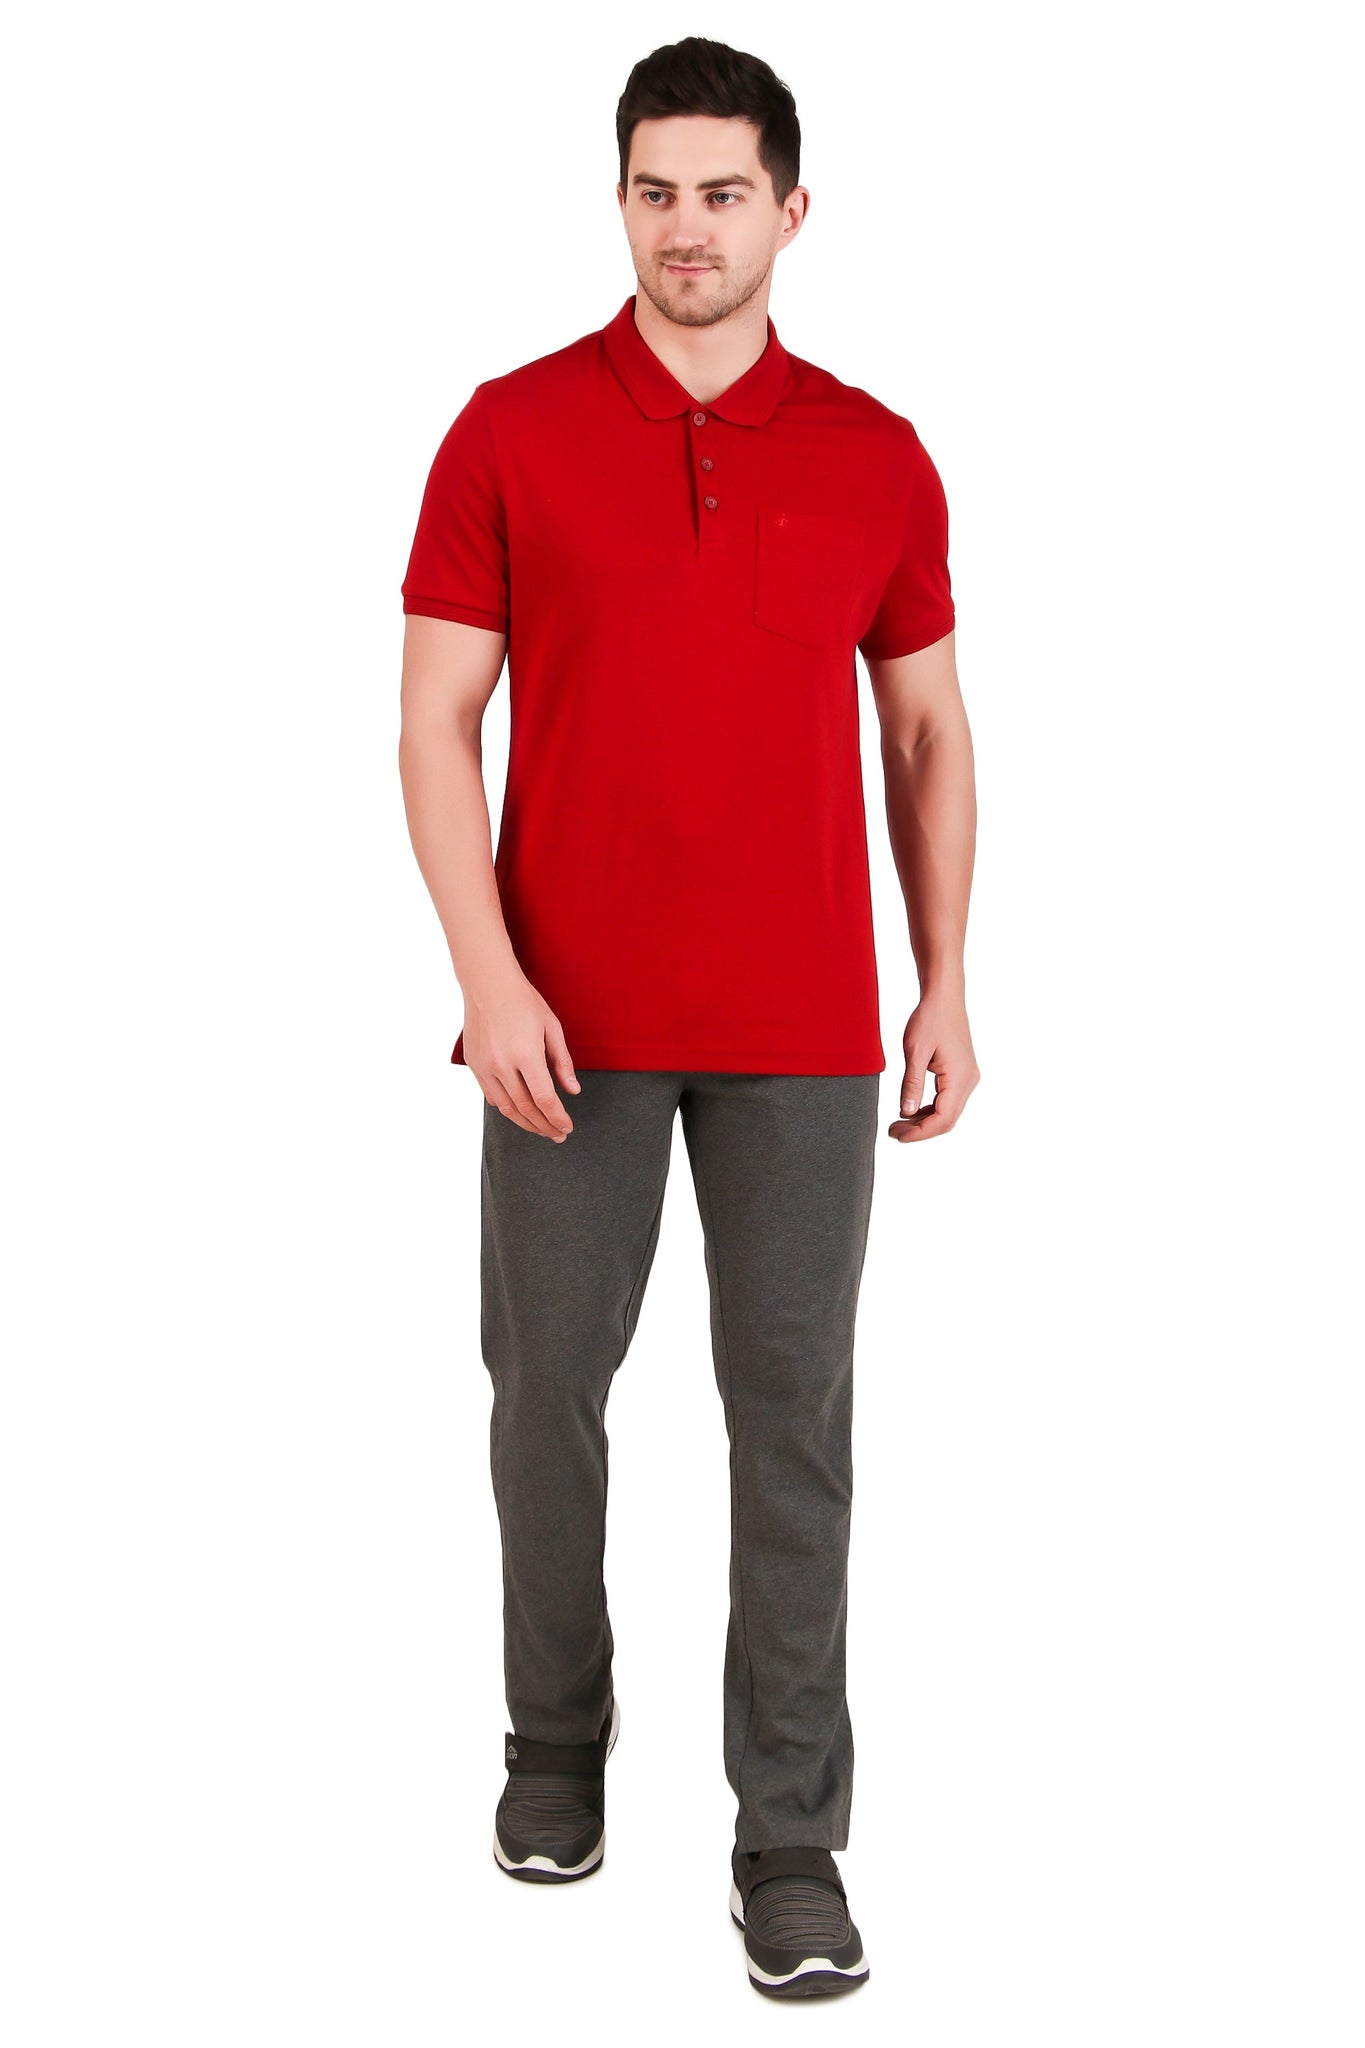 Jockey-3913 Super Combed Cotton Rich Solid Half Sleeve Polo T-Shirt with Chest Pocket